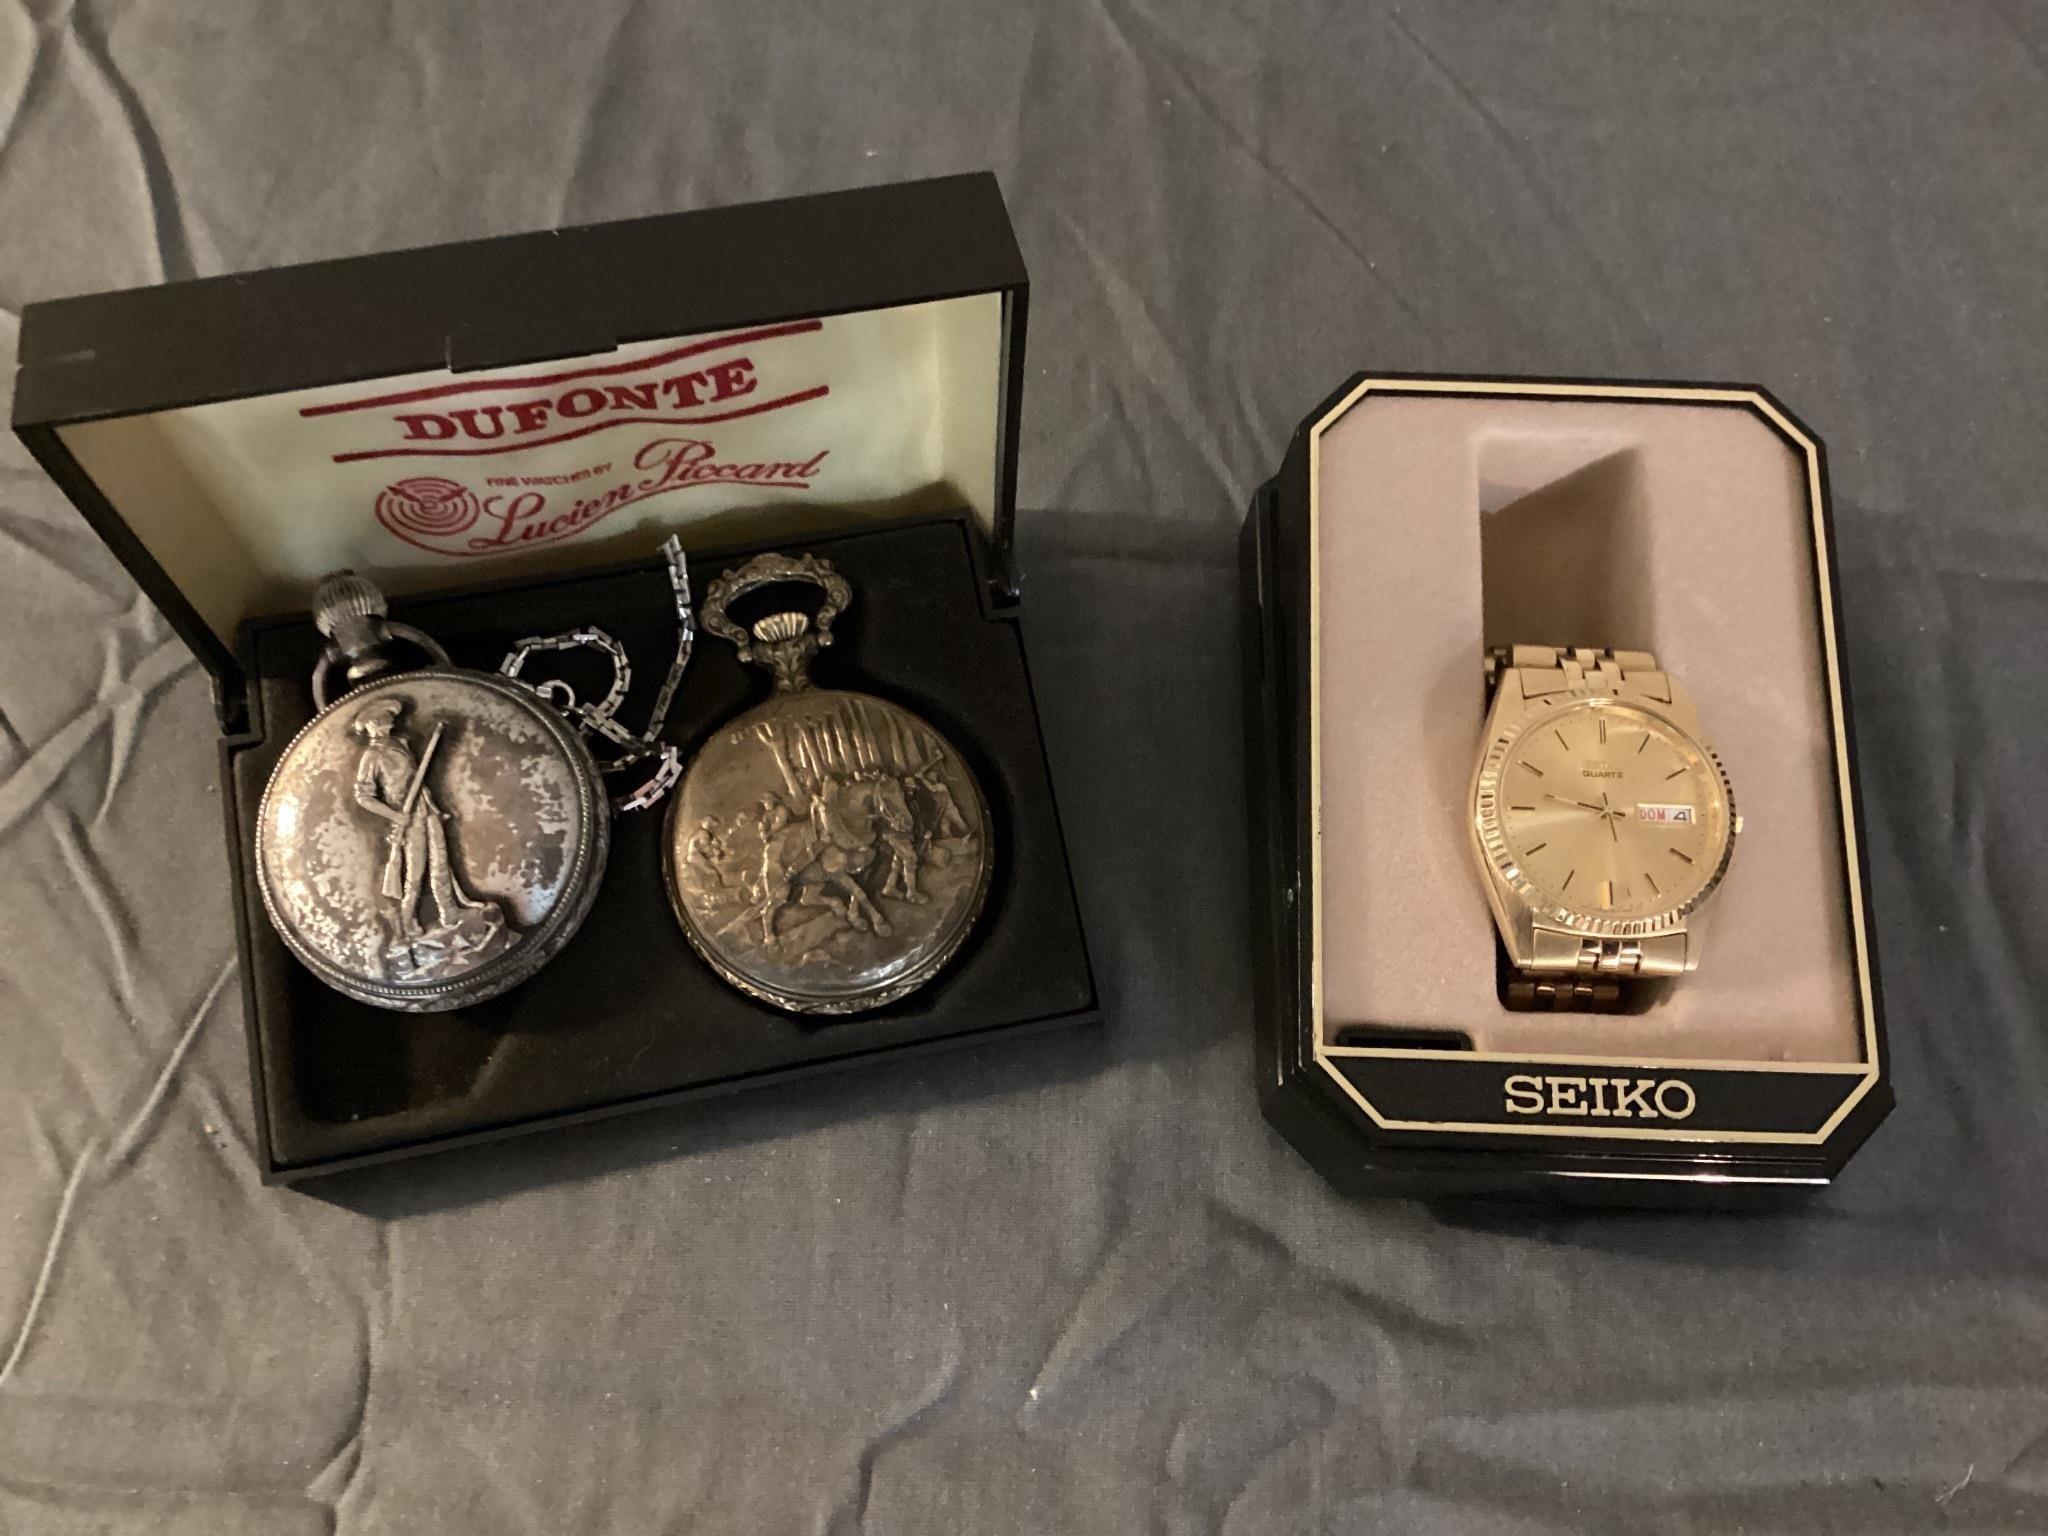 SEIKO watch and pocket watches